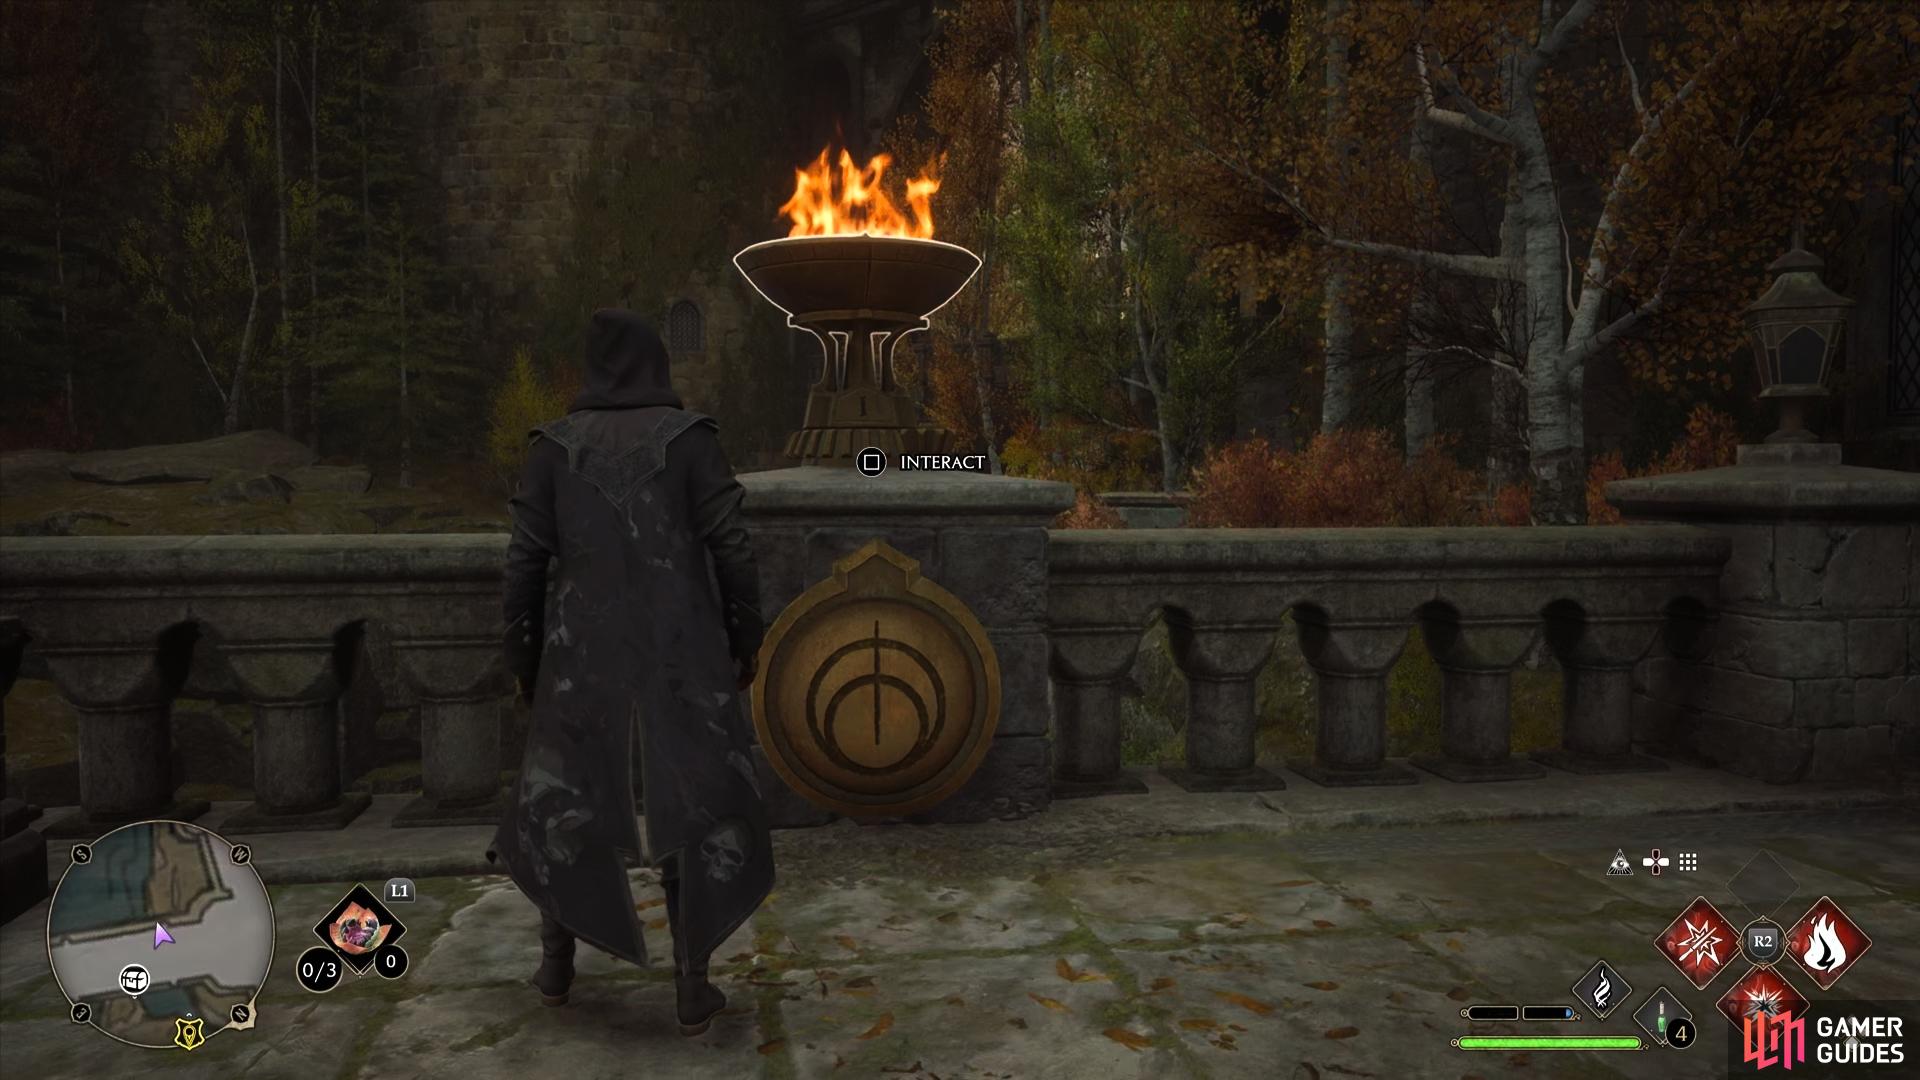 The second brazier that needs to be ignited